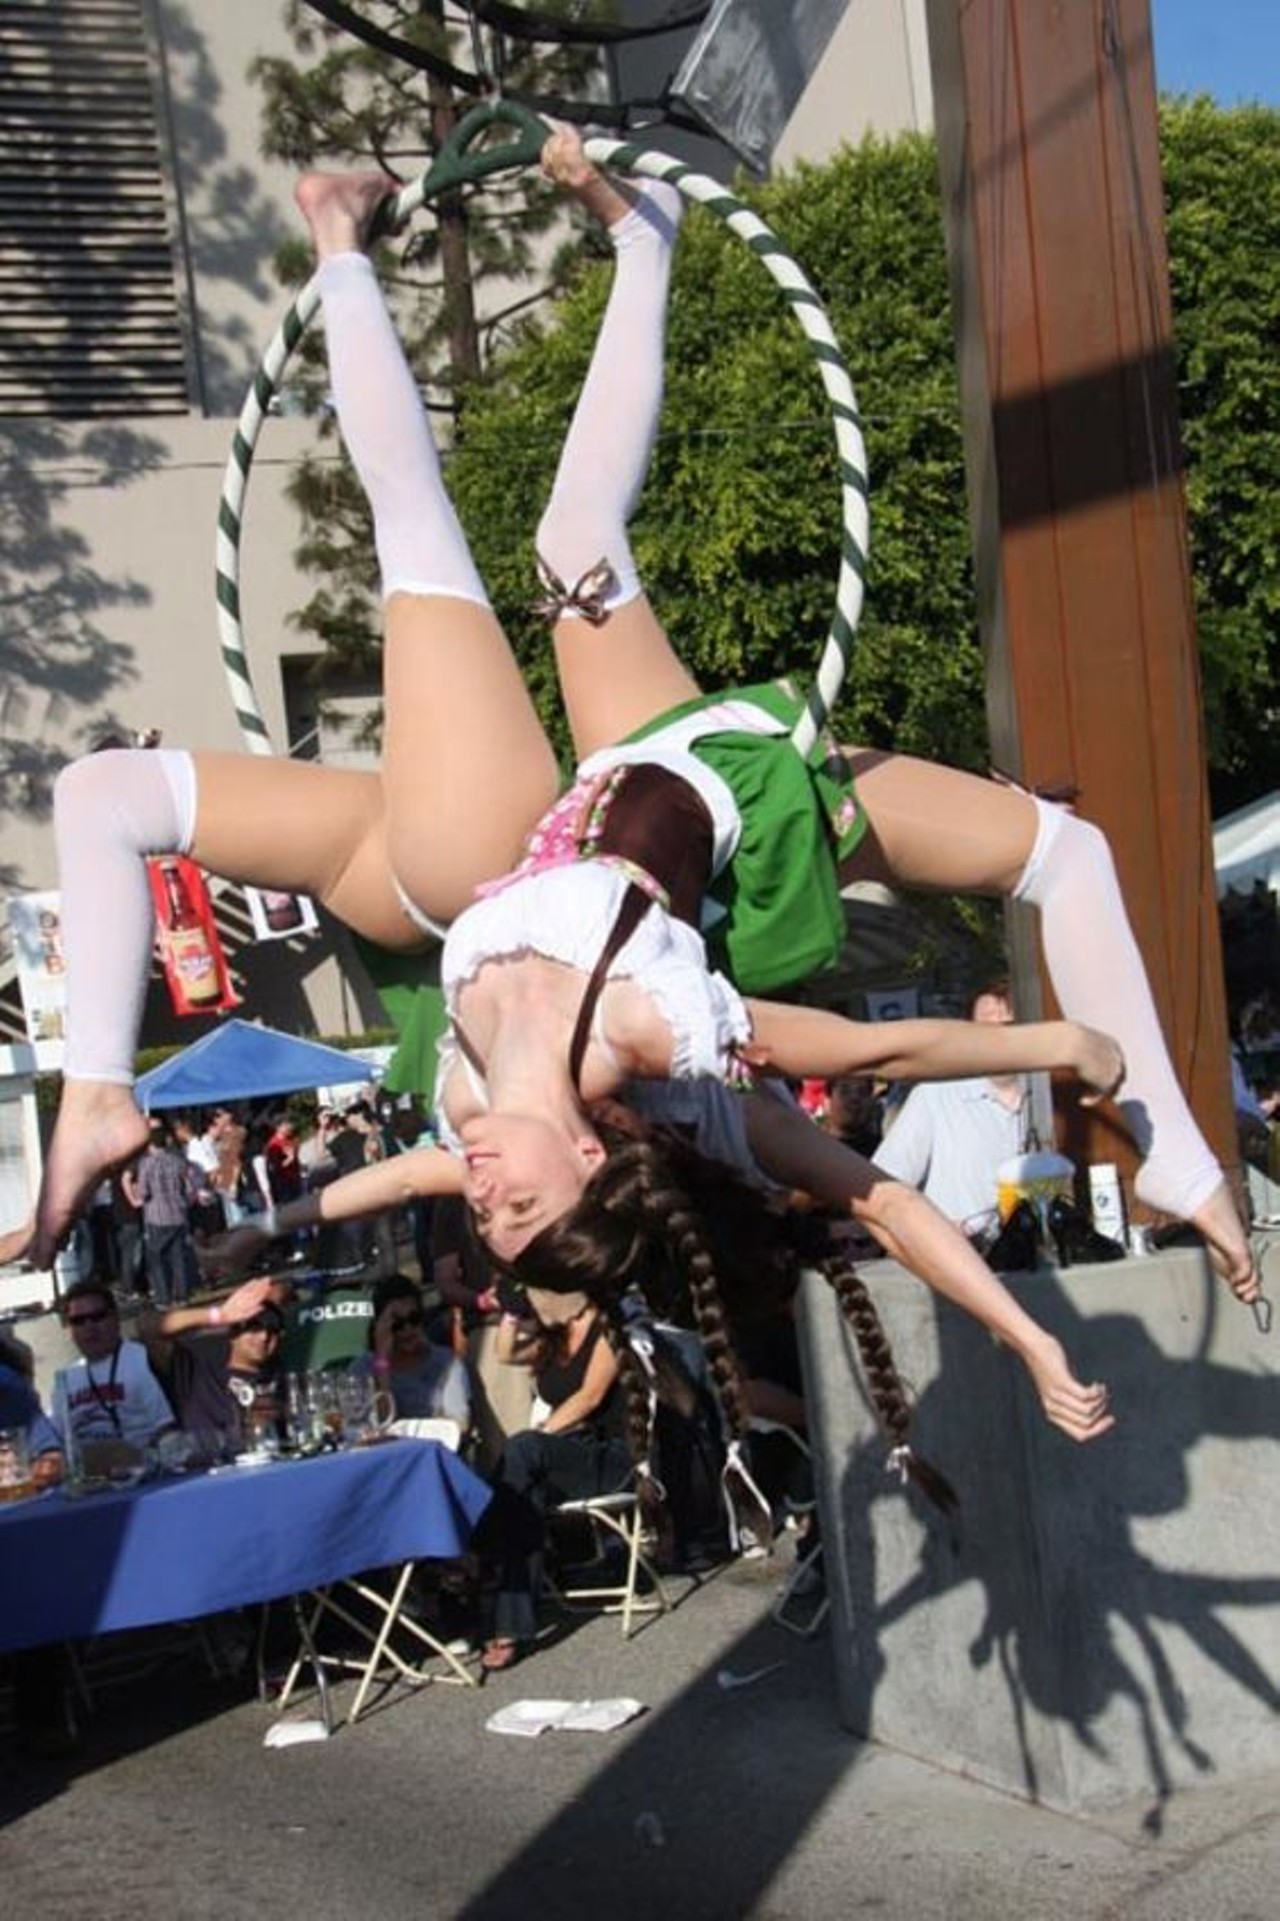 This upside-down frau (and her friend too) from L.A. Oktoberfest